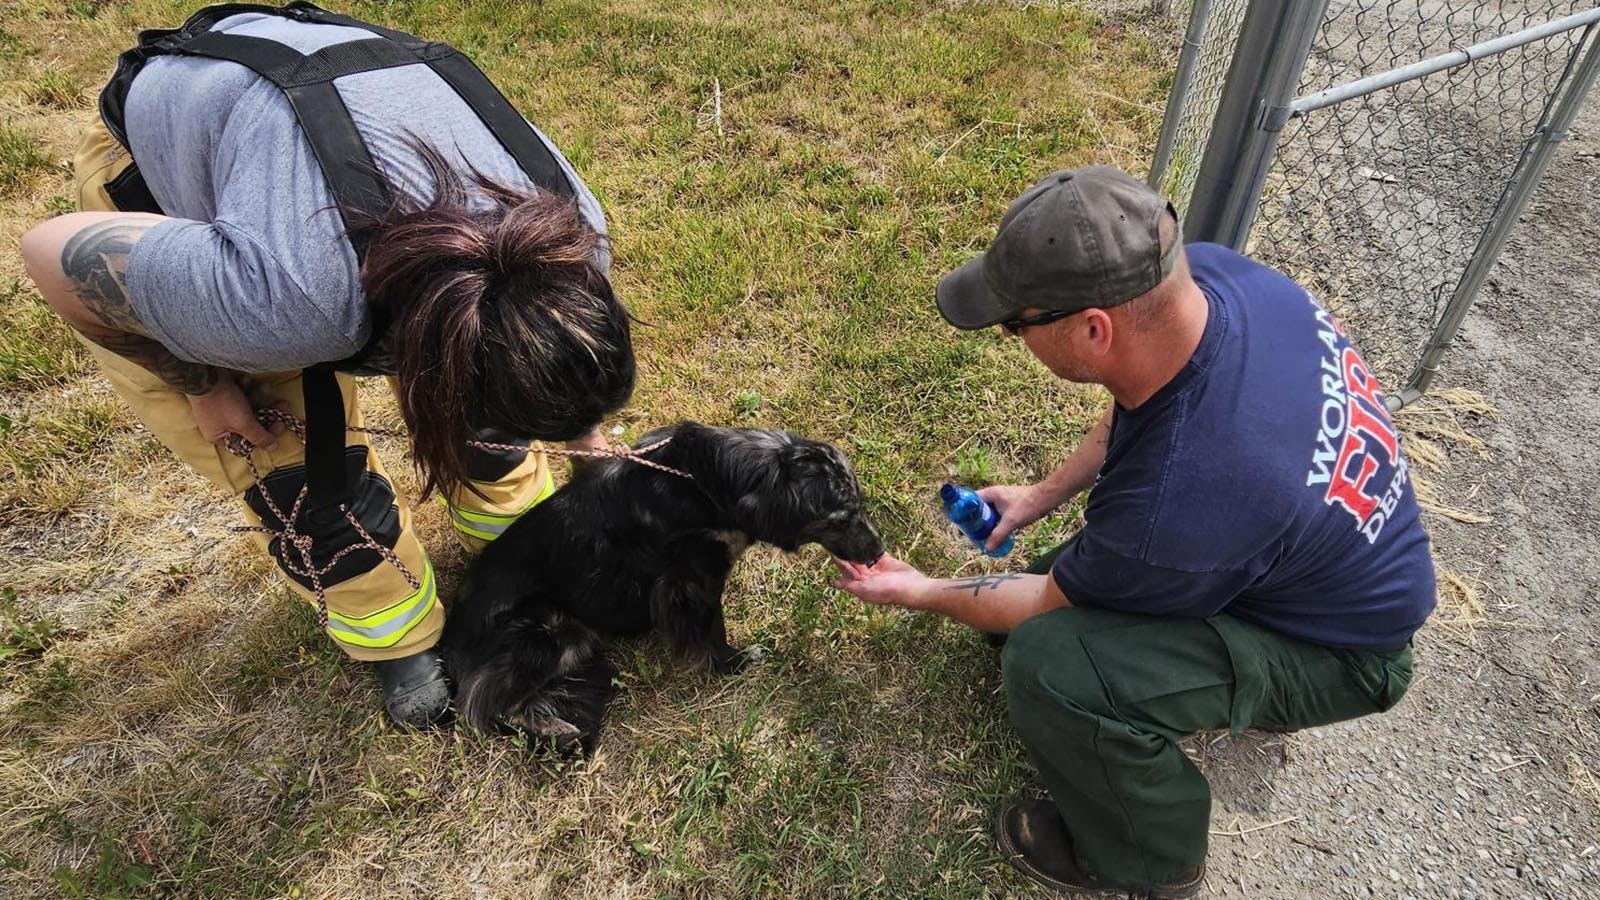 This scare, starving and dehydrated pooch that's been nammed Libby had been stuck in this deep concrete water tank for day when Worland city workers noticed her. Woorland firefighters then rescued Libby, who is recovering.